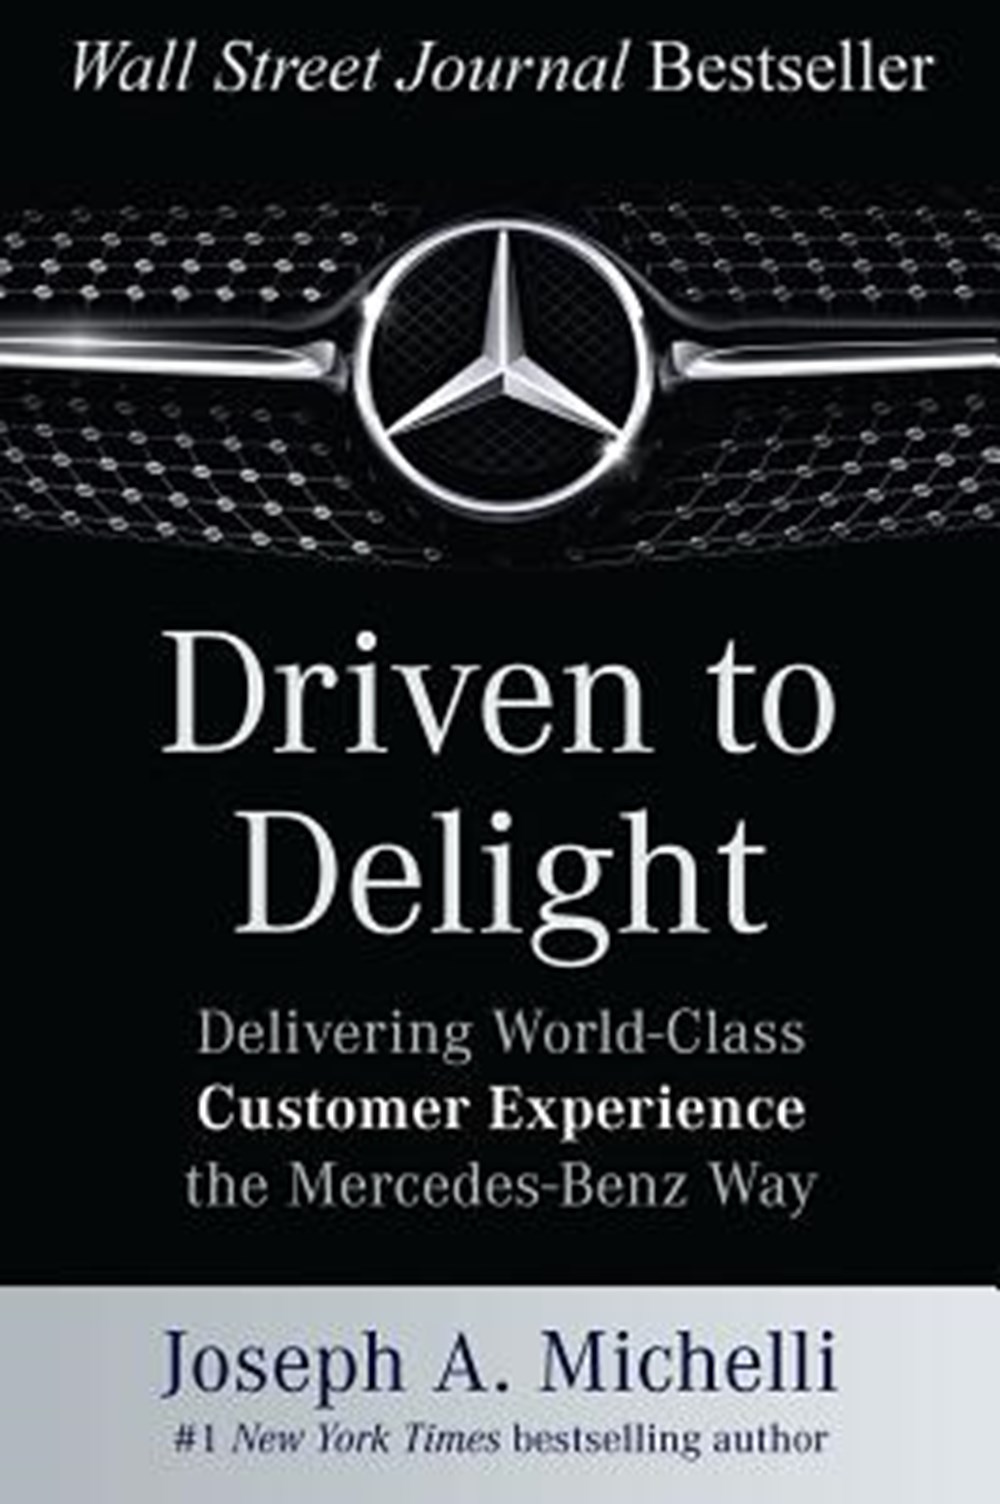 Driven to Delight Delivering World-Class Customer Experience the Mercedes-Benz Way